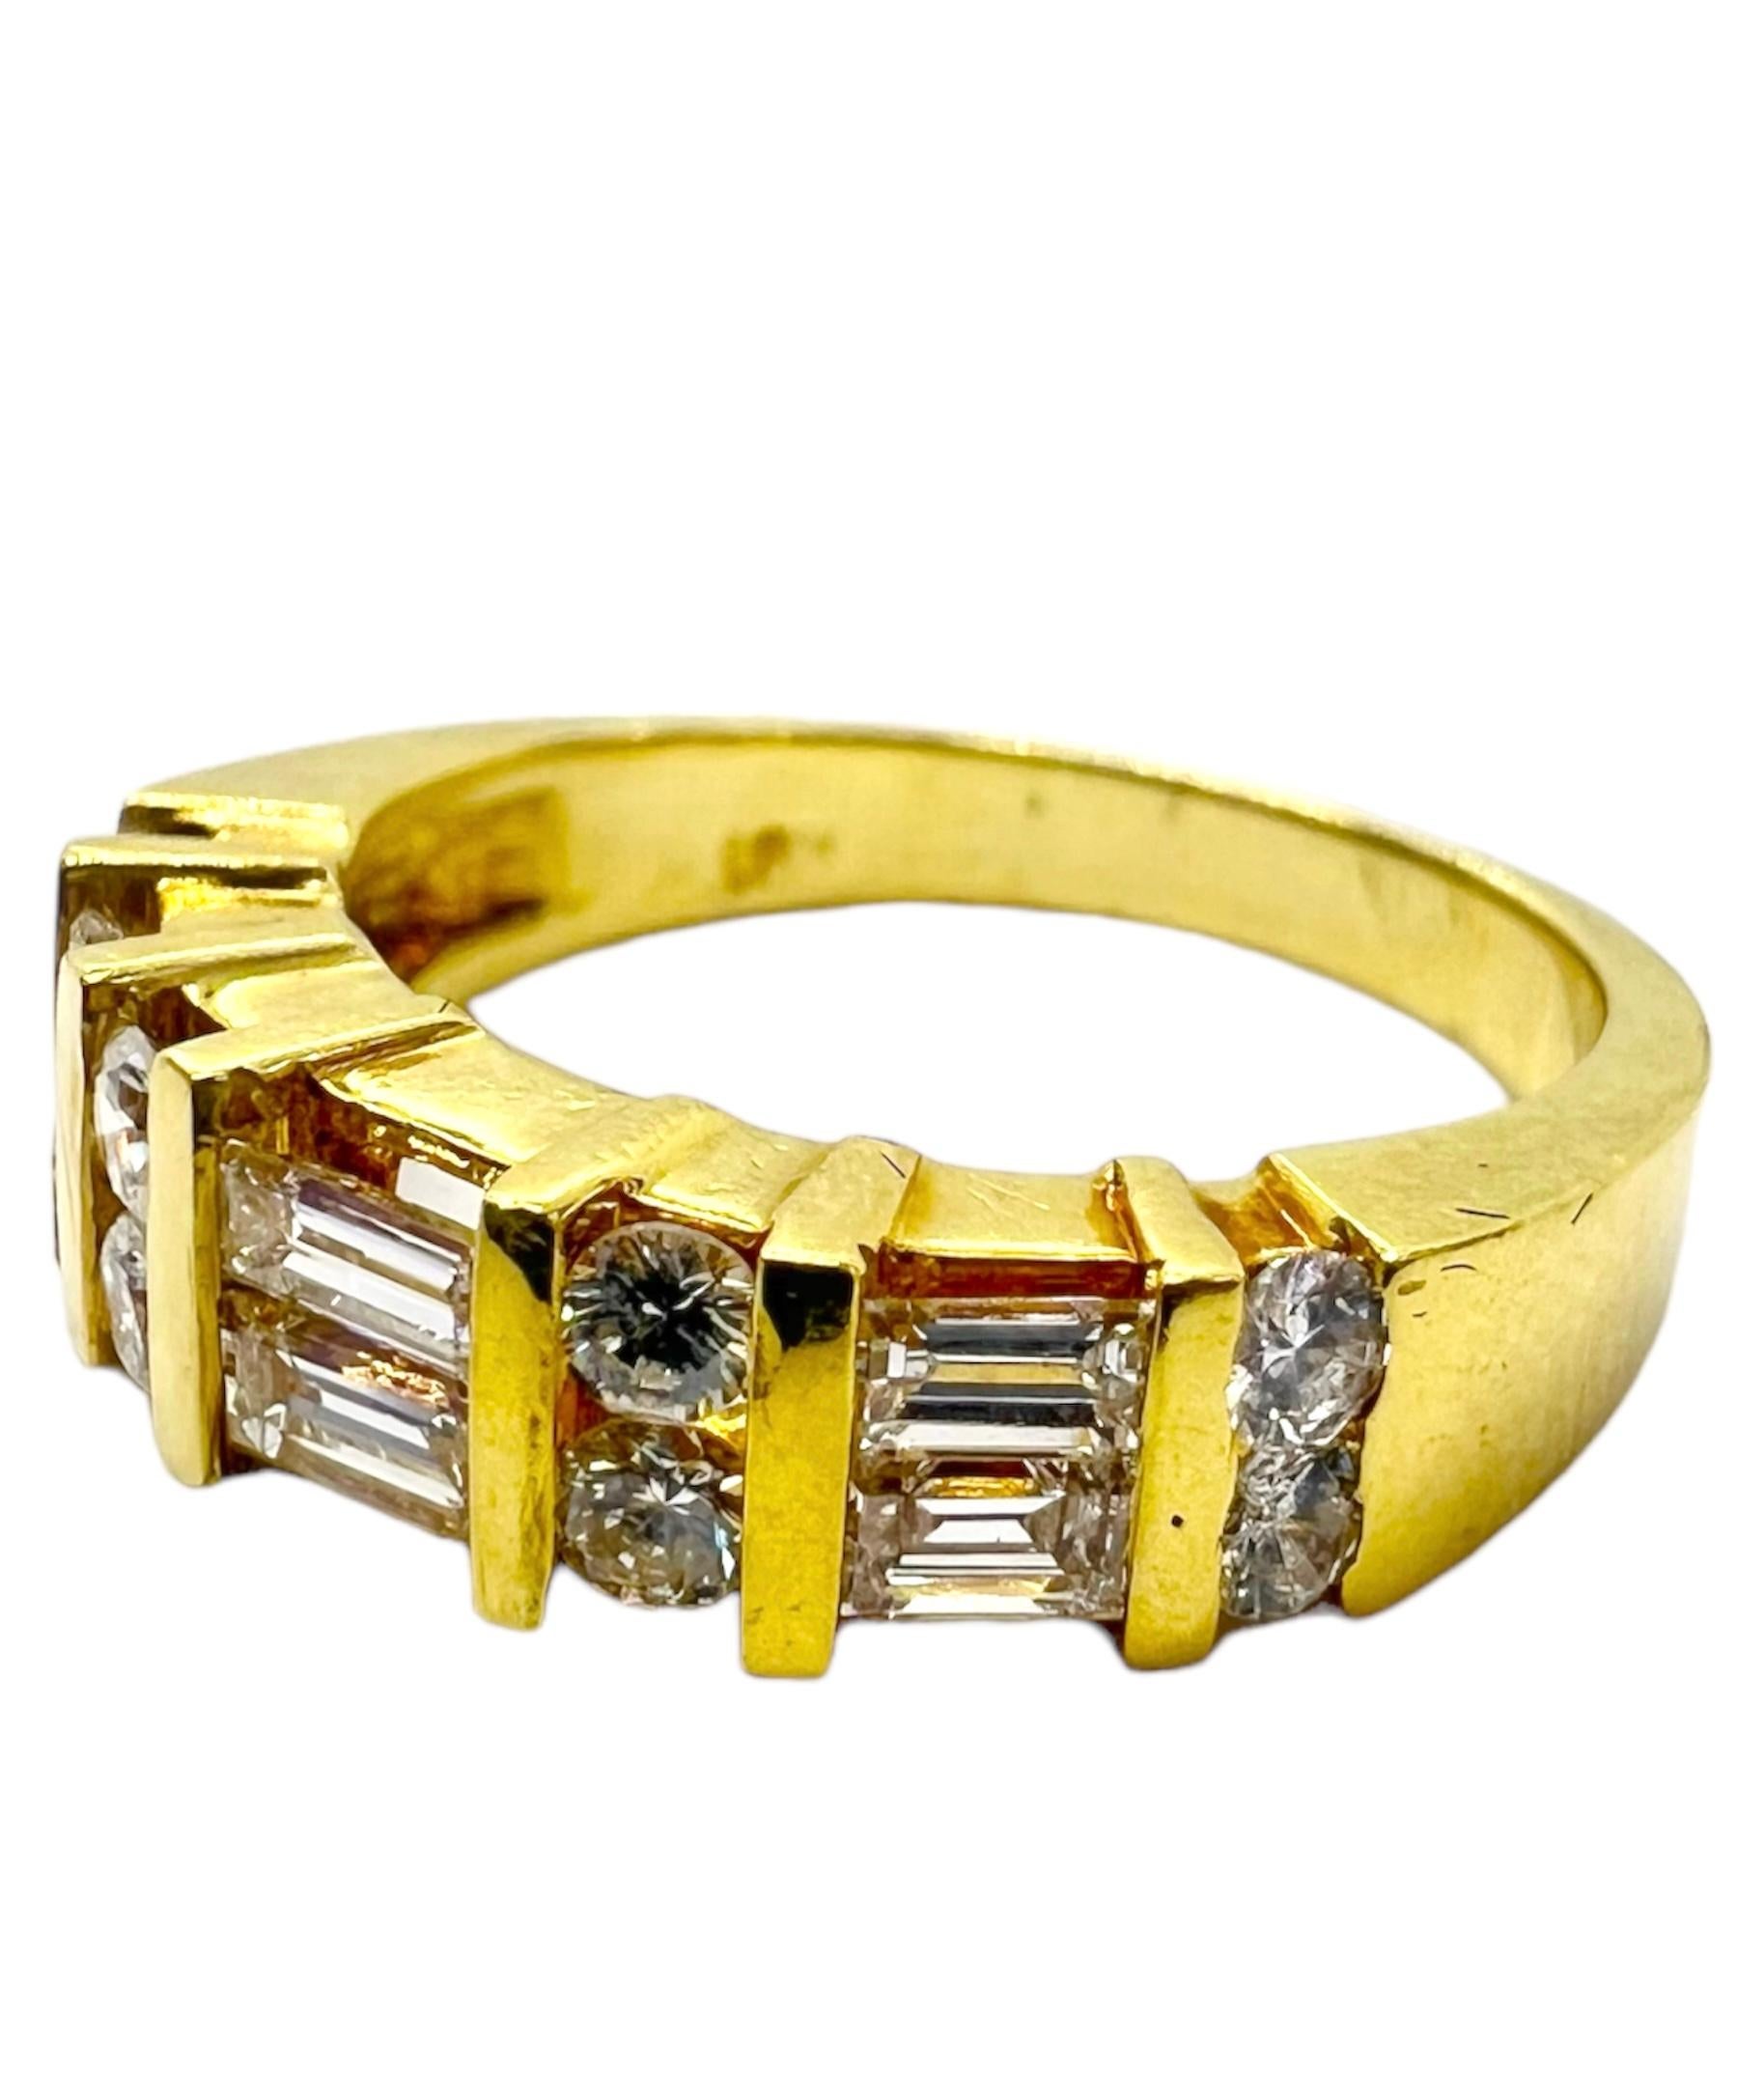 18K yellow gold ring with baguette cut diamonds and small round diamonds.

Sophia D by Joseph Dardashti LTD has been known worldwide for 35 years and are inspired by classic Art Deco design that merges with modern manufacturing techniques.   